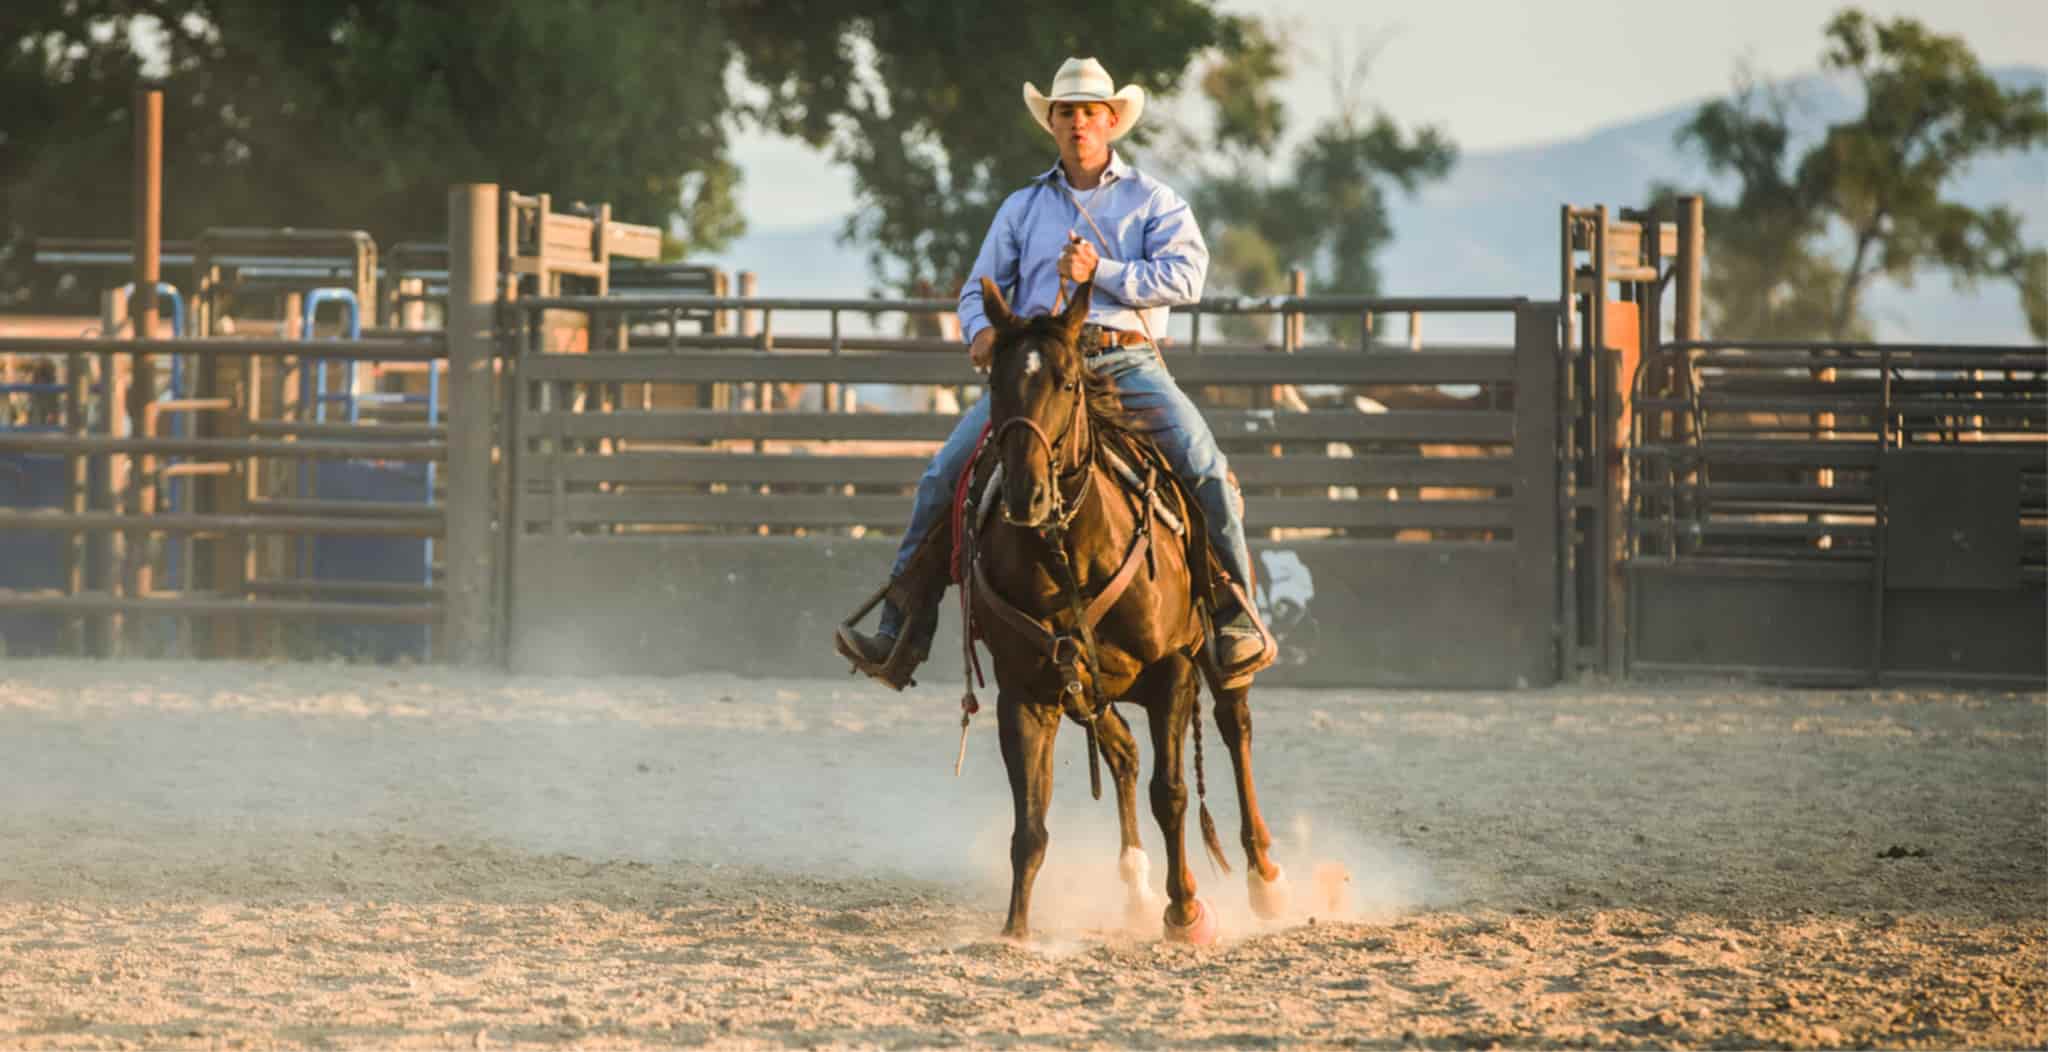 Campdrafting is an equine discipline requiring highly skilled horsemanship which requires extensive levels of horse care to maintain a happy and heathy horse.